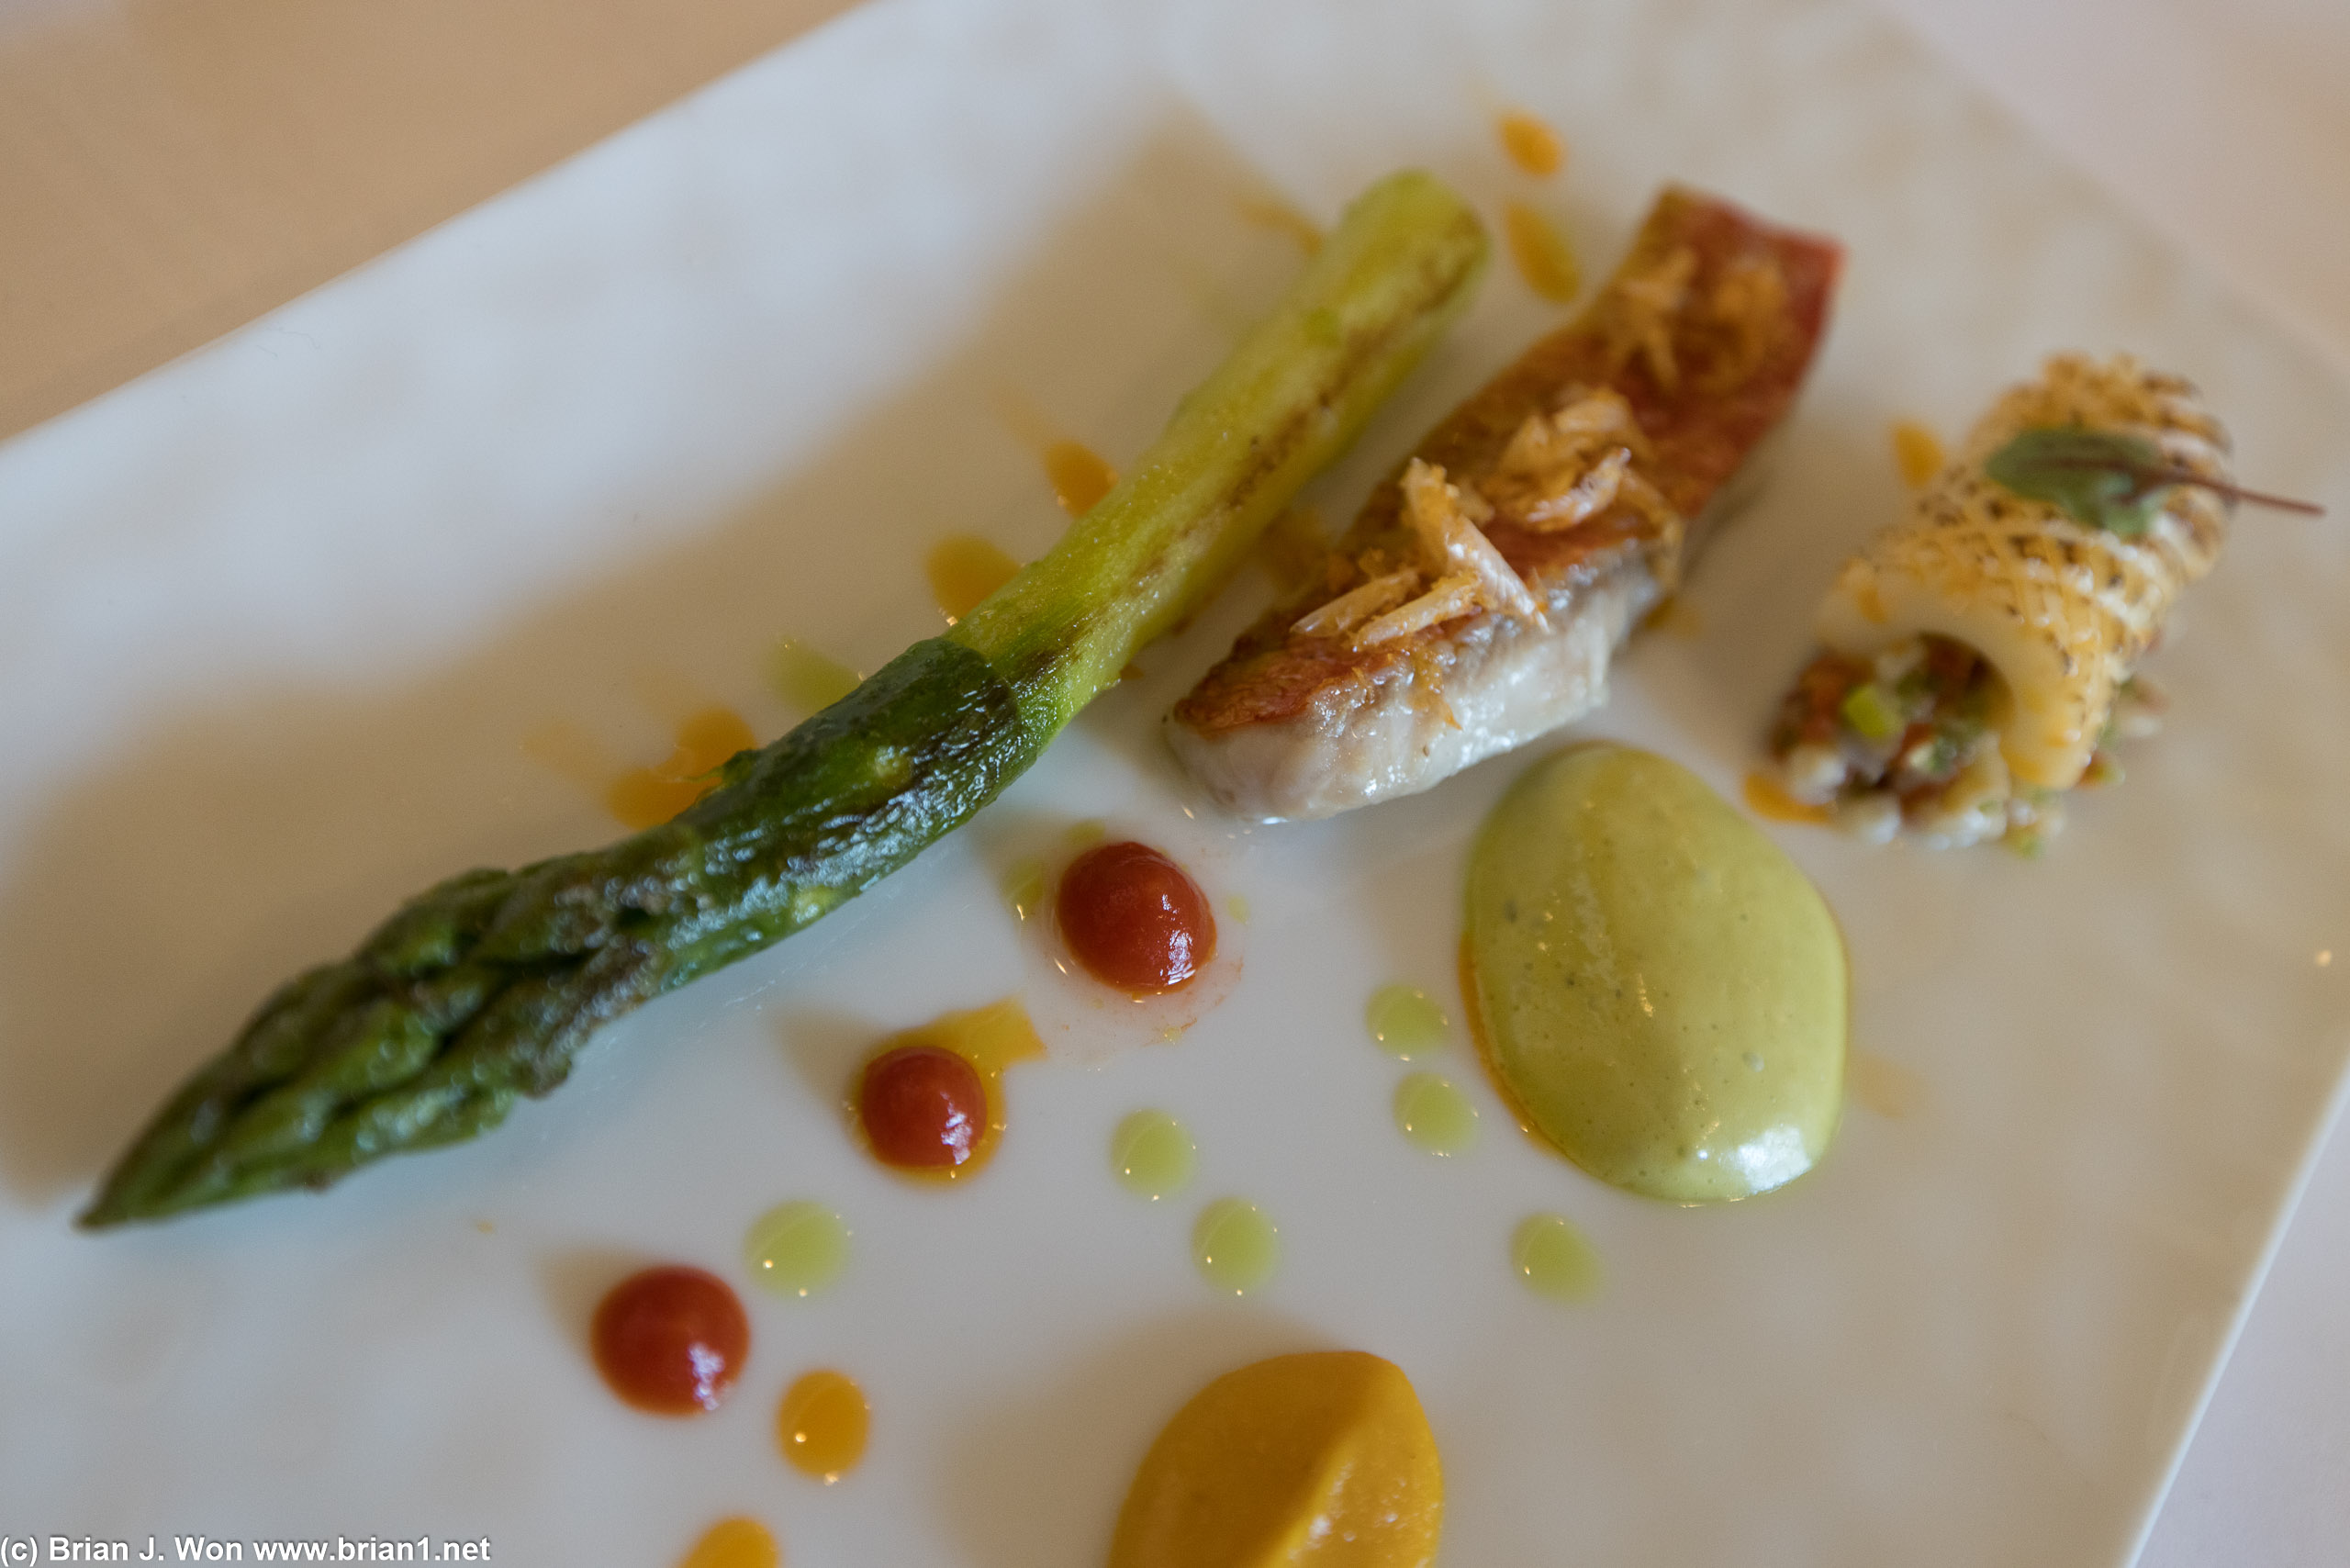 Fillet of red mullet, roasted green asparagus, squid.